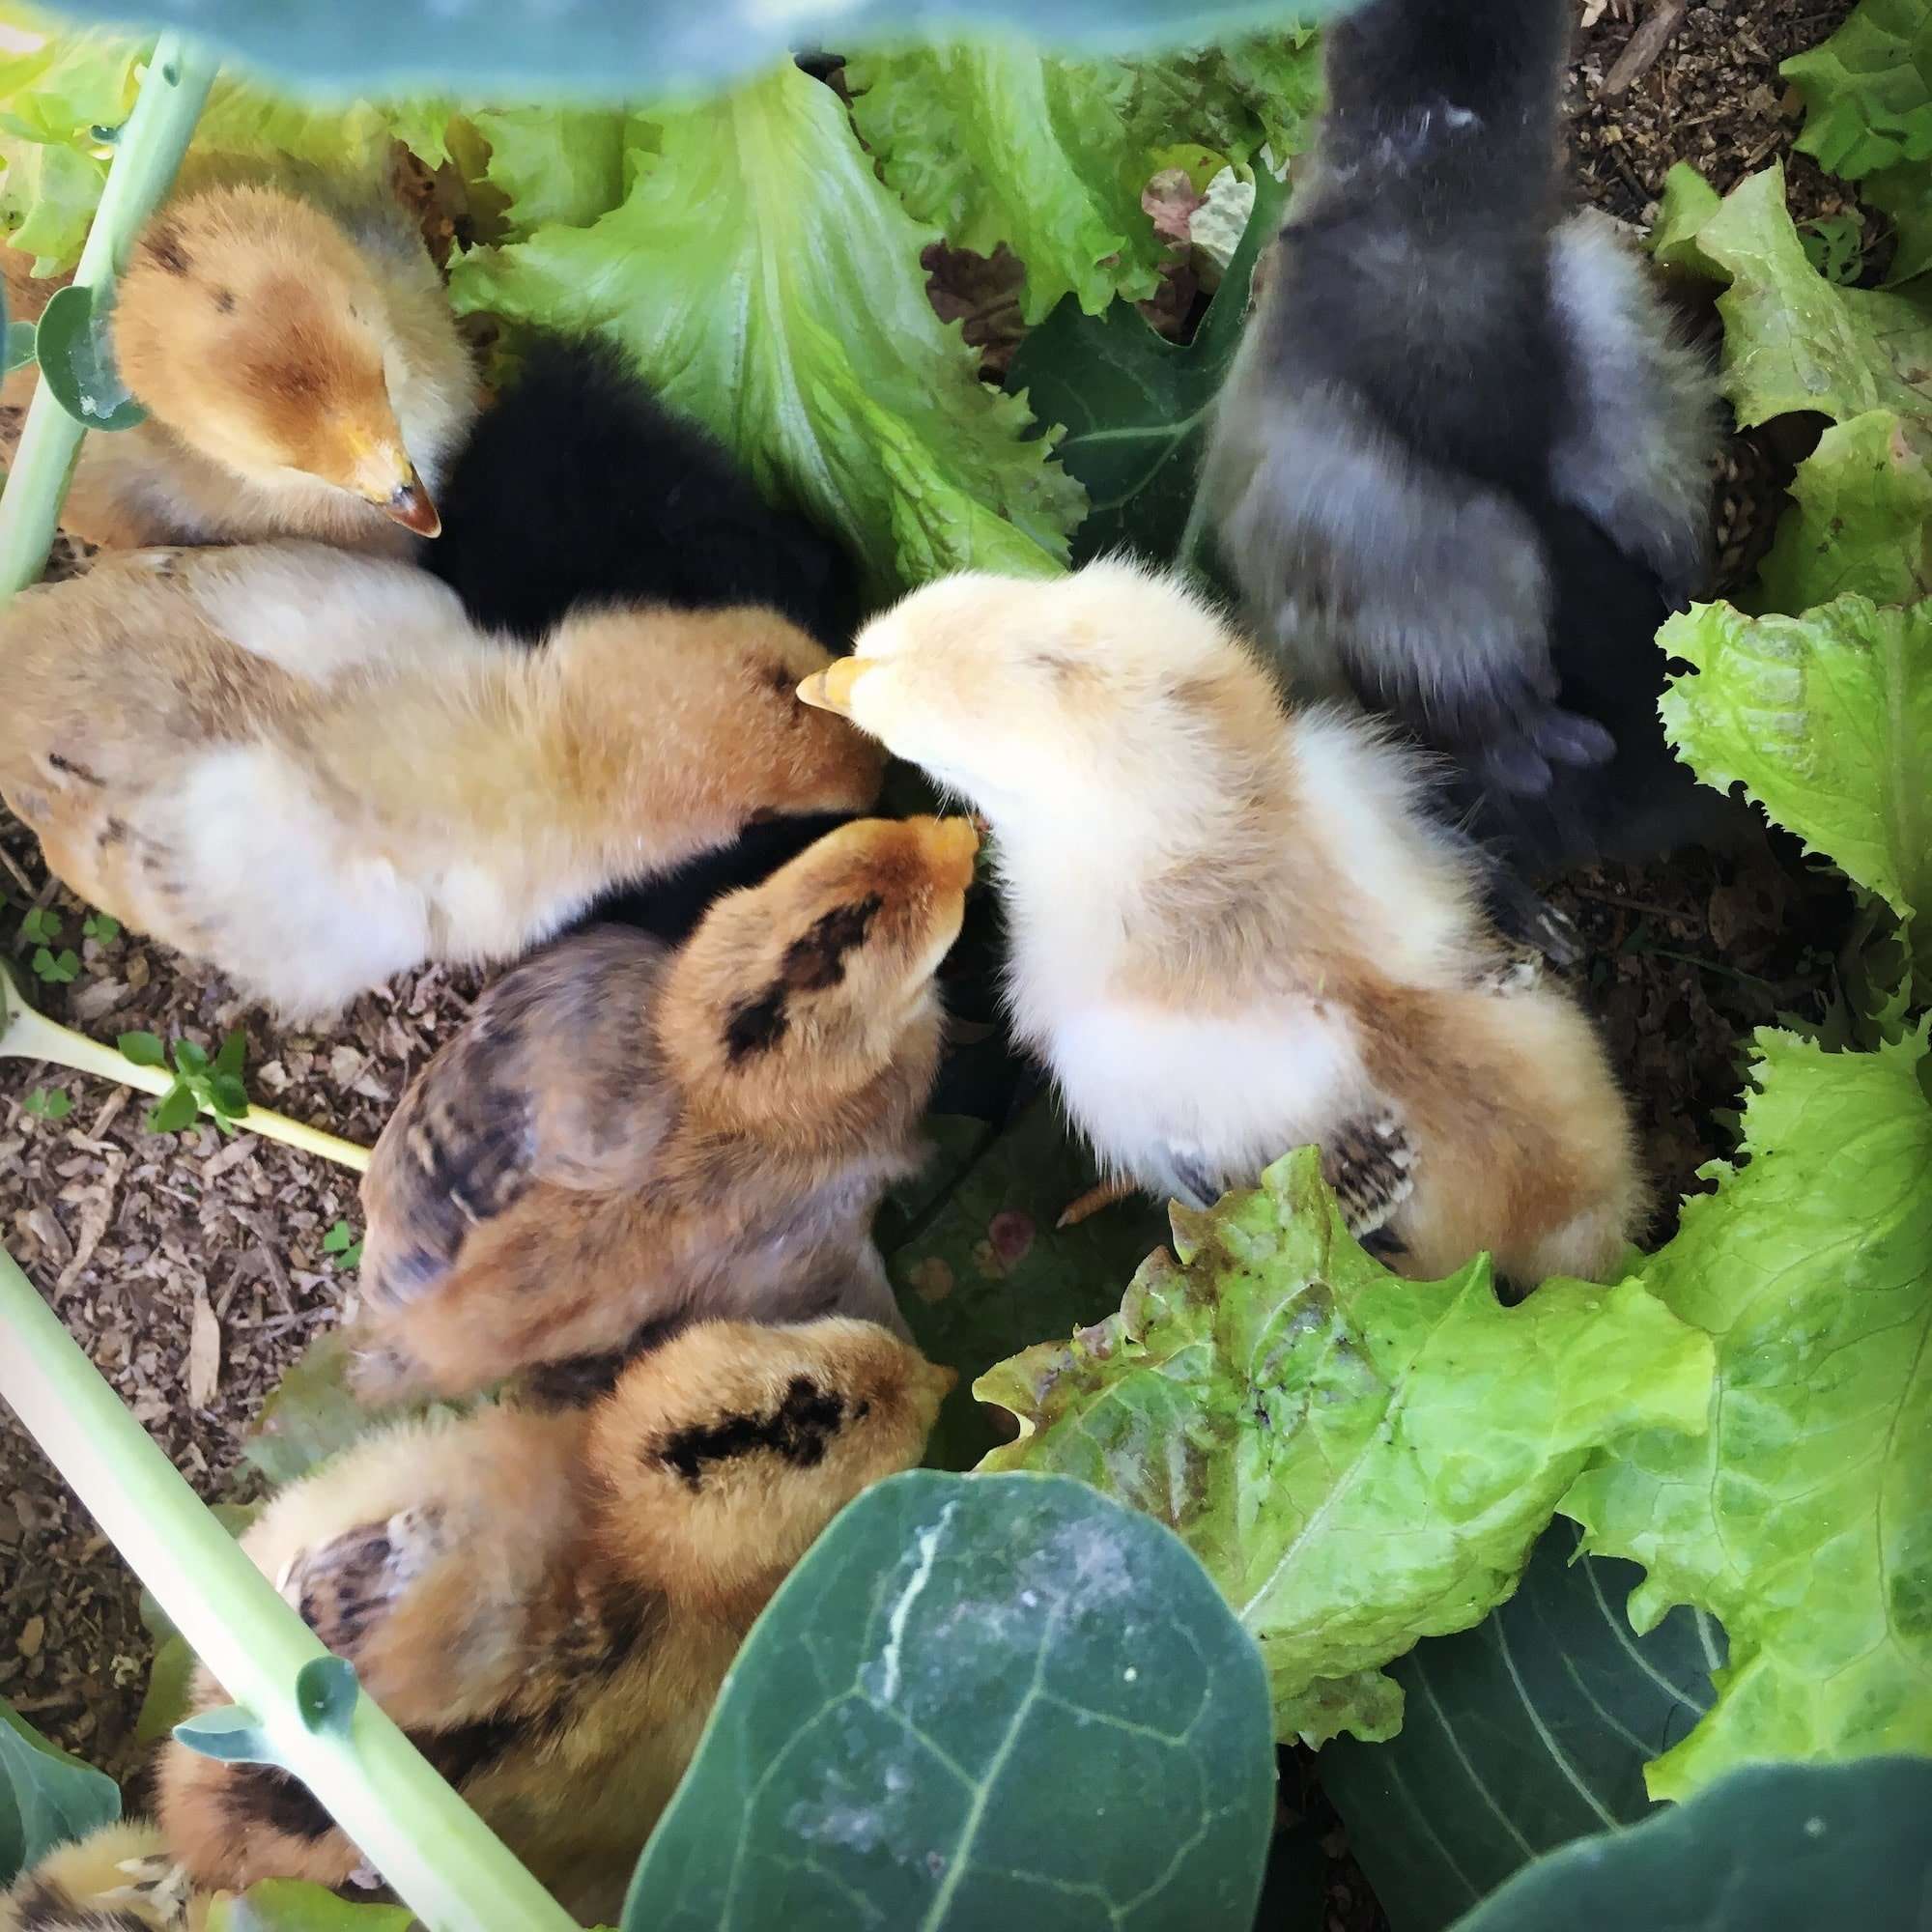 Aerial view of baby chicks in the garden